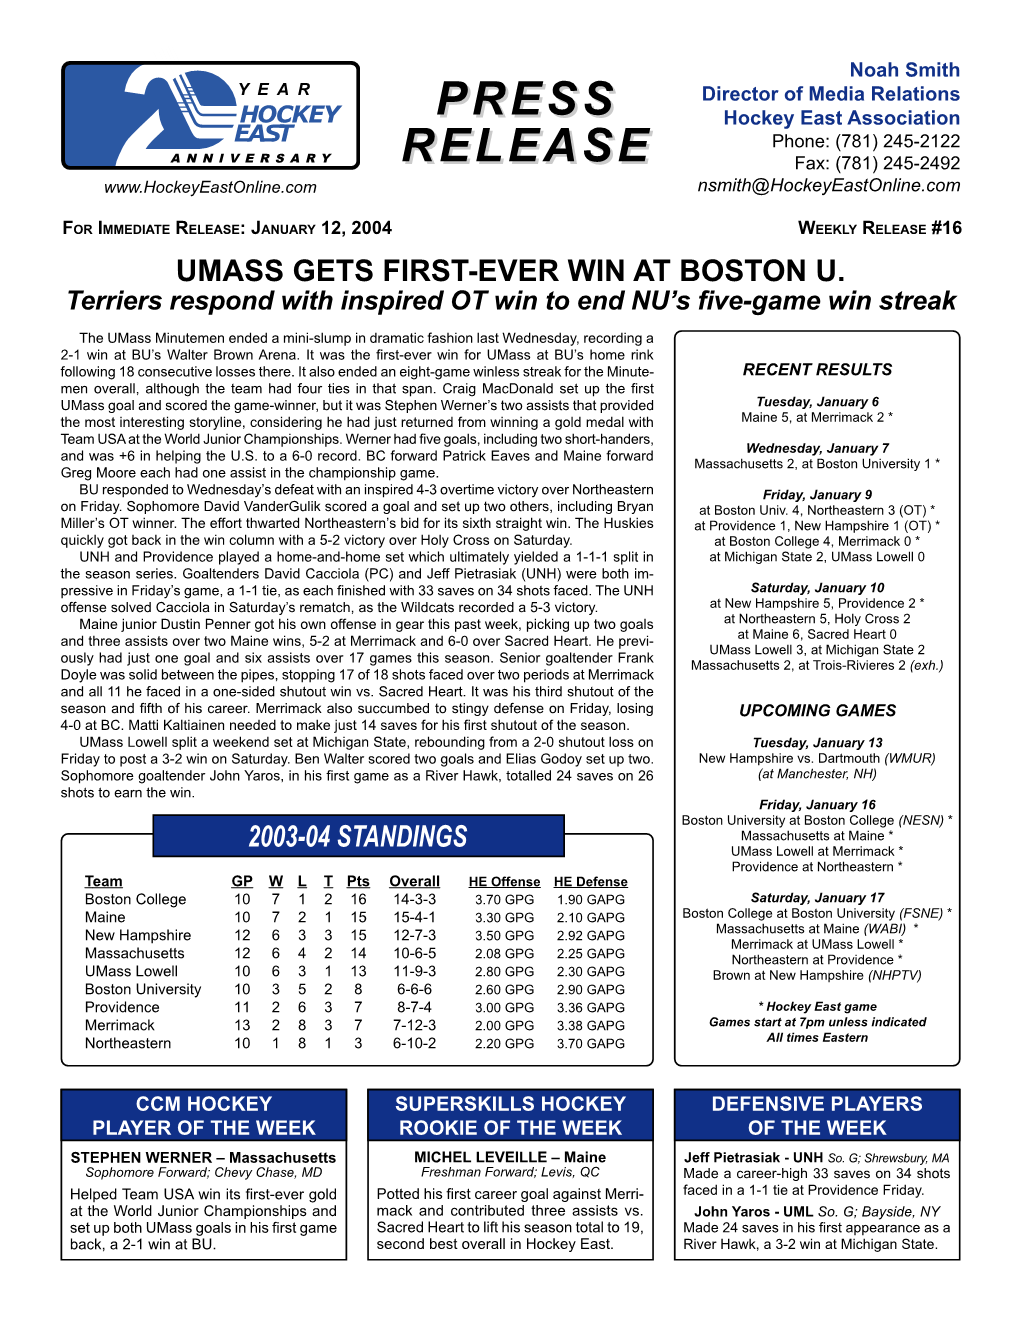 Weekly Release #16 Umass Gets First-Ever Win at Boston U